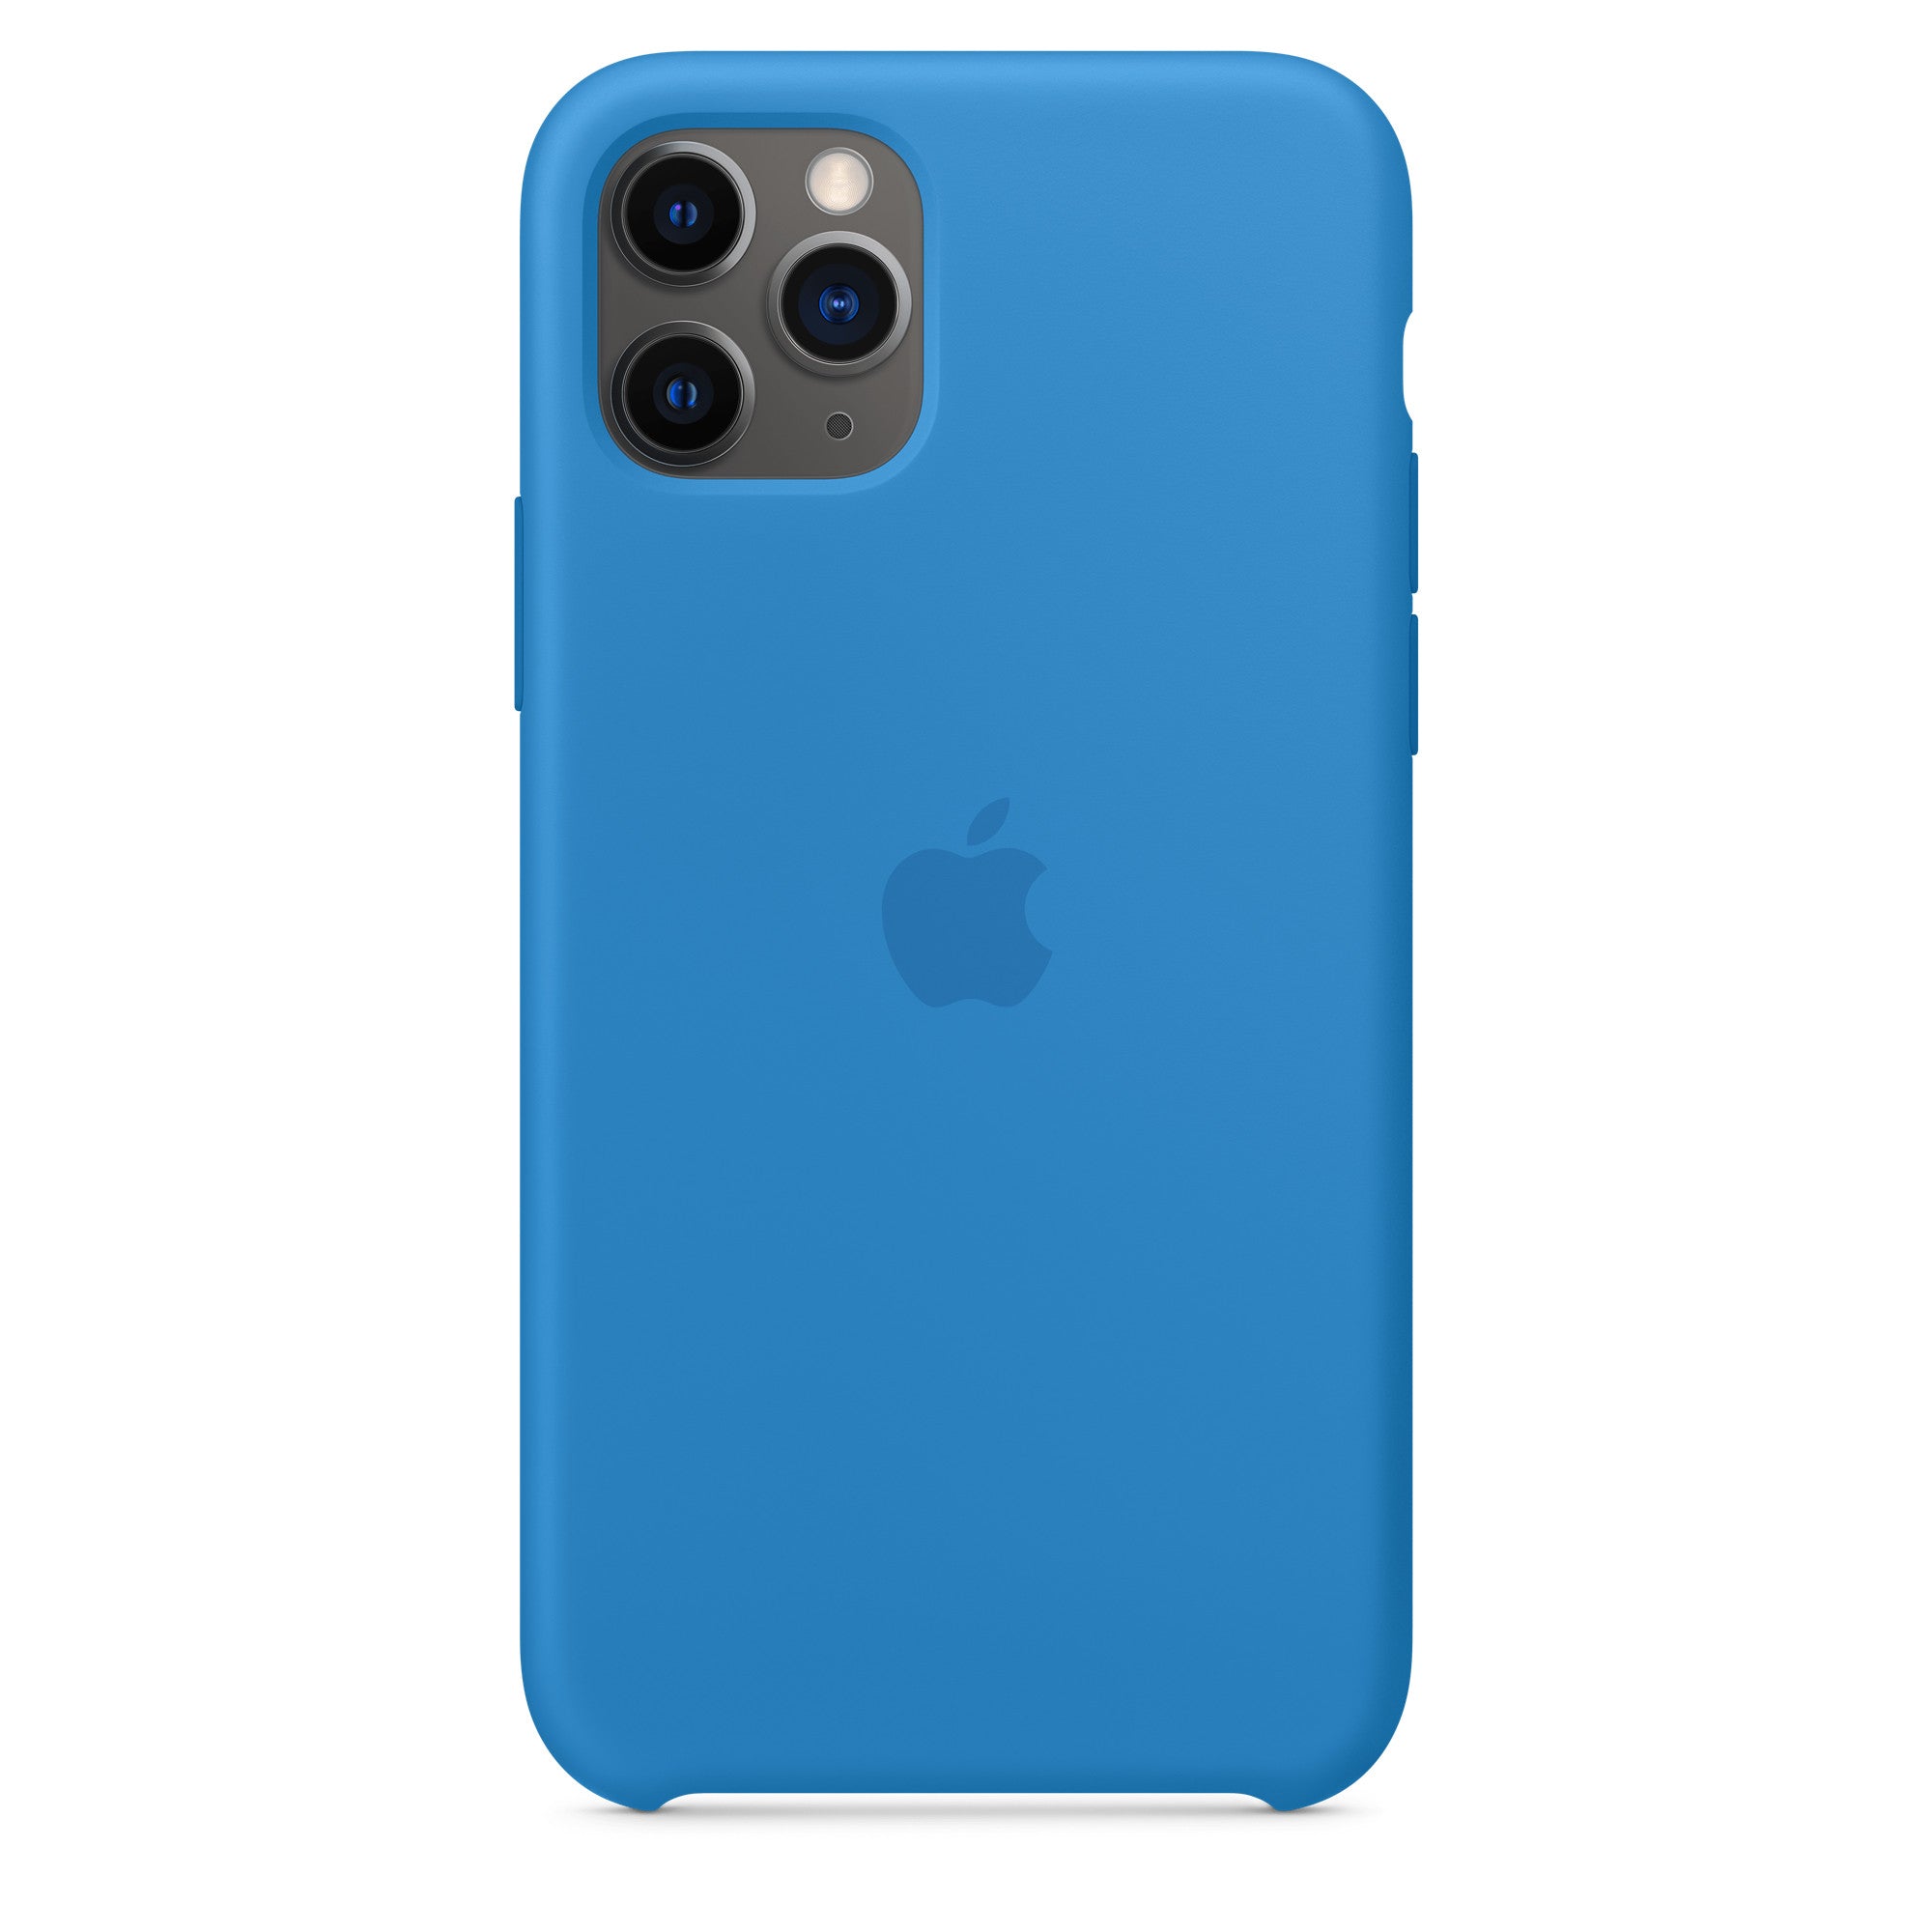 Apple iPhone 11 Pro Silicone Case - Surf Blue - Brand New